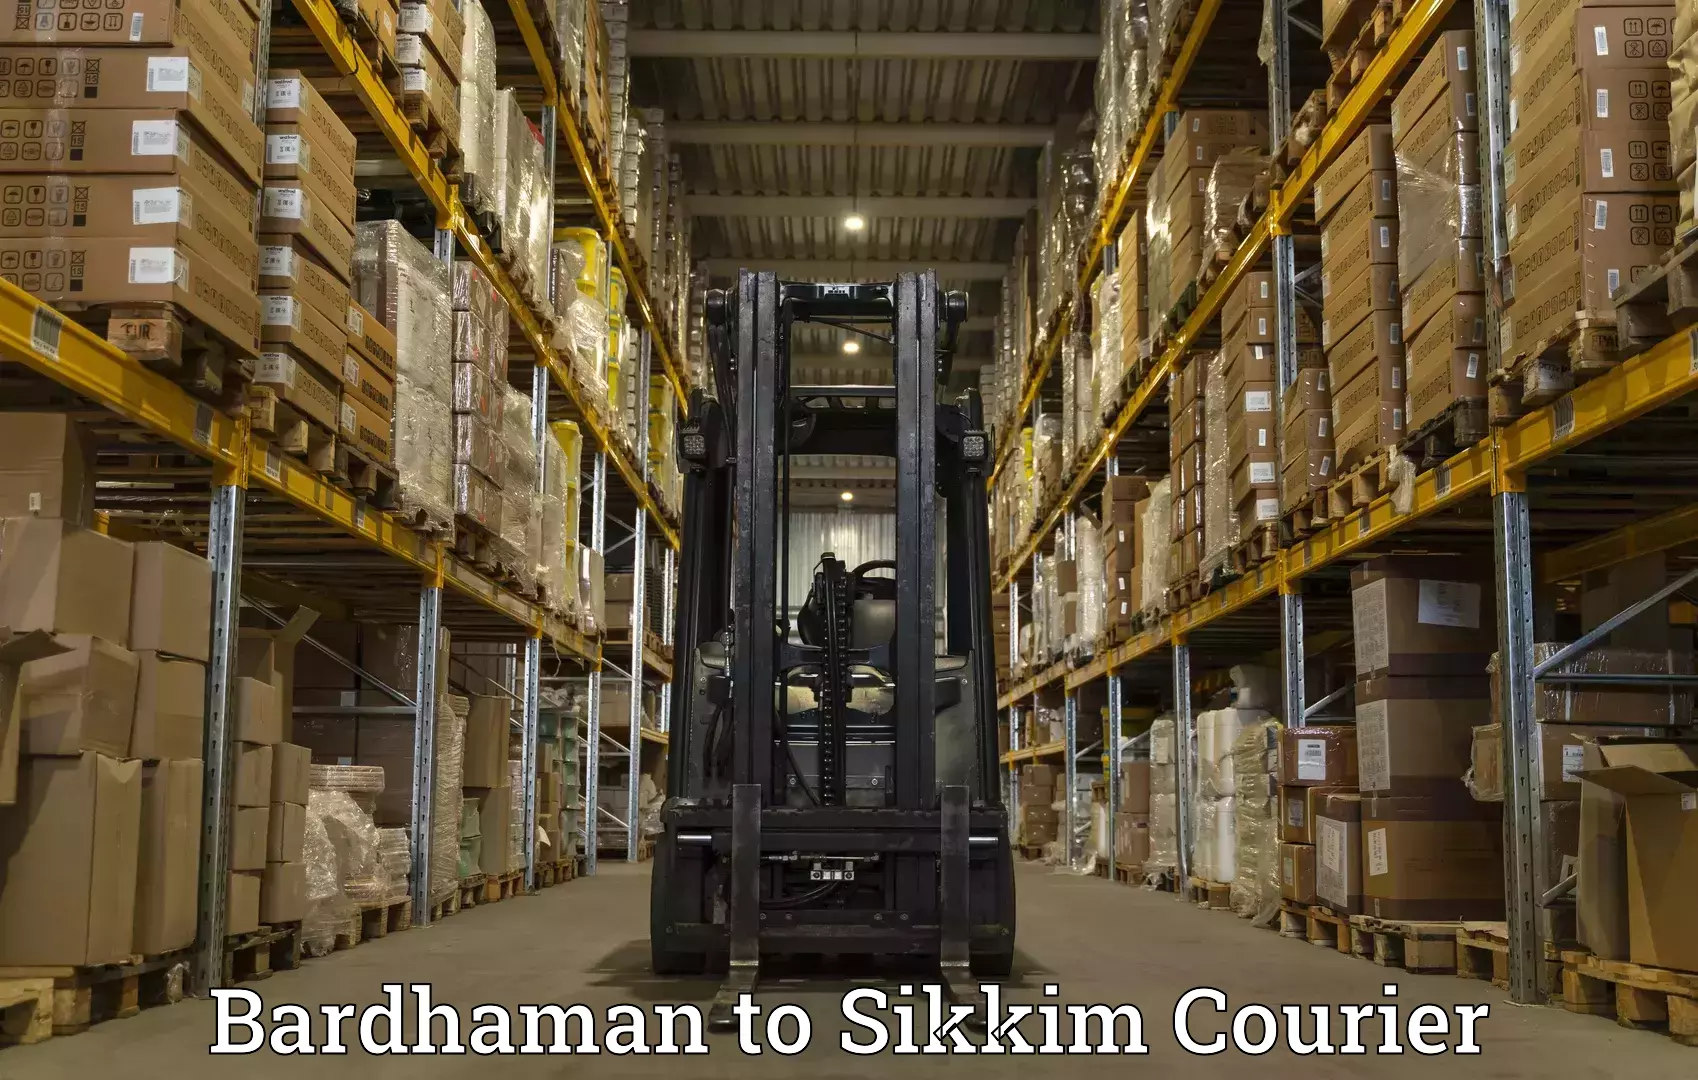 Express delivery capabilities Bardhaman to Sikkim